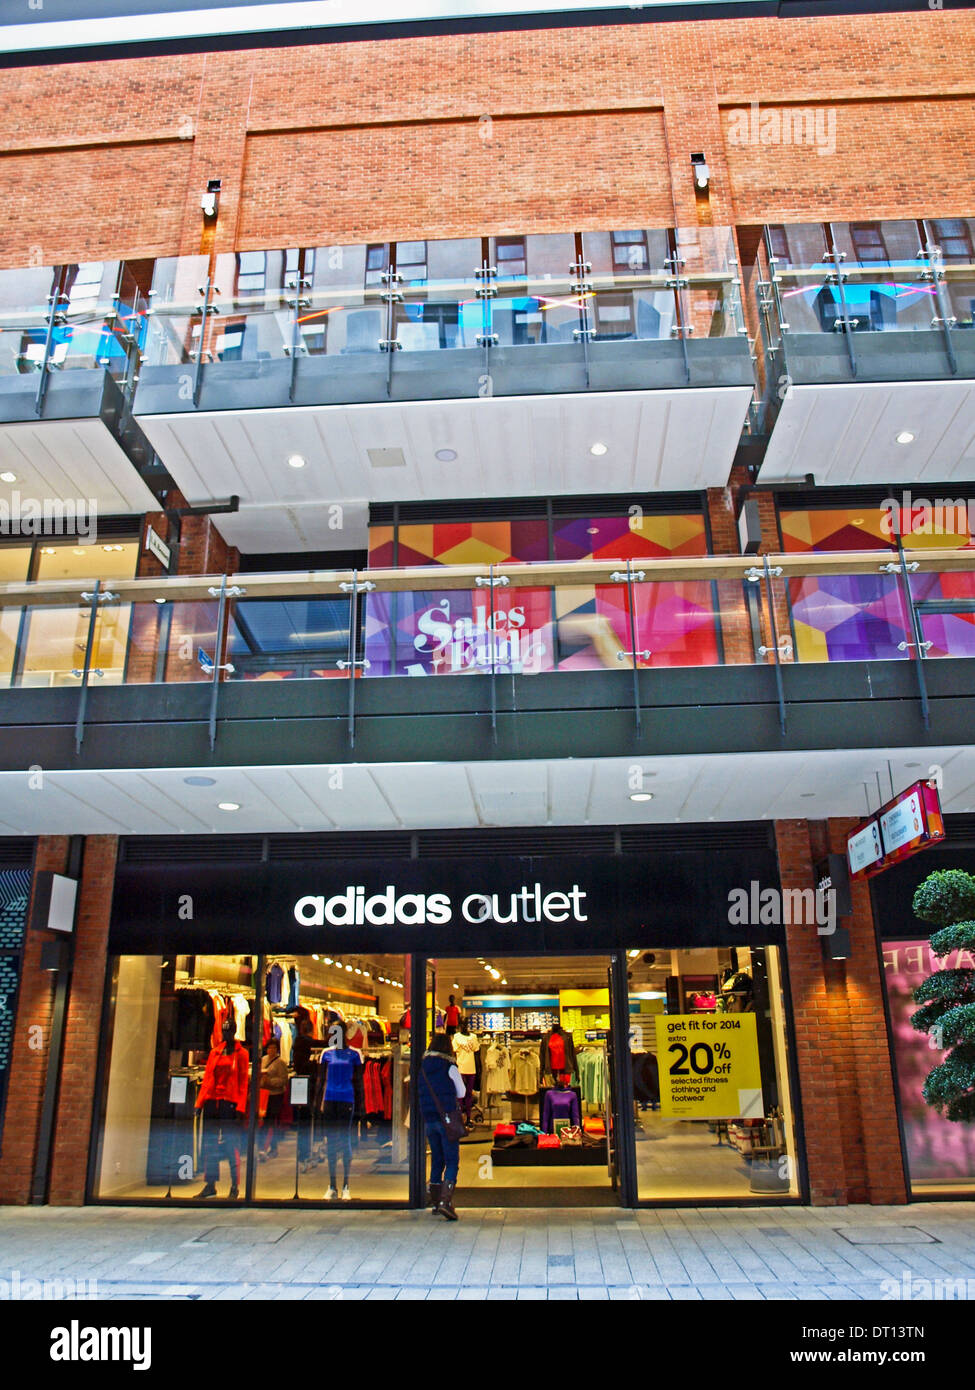 adidas imm outlet promotion